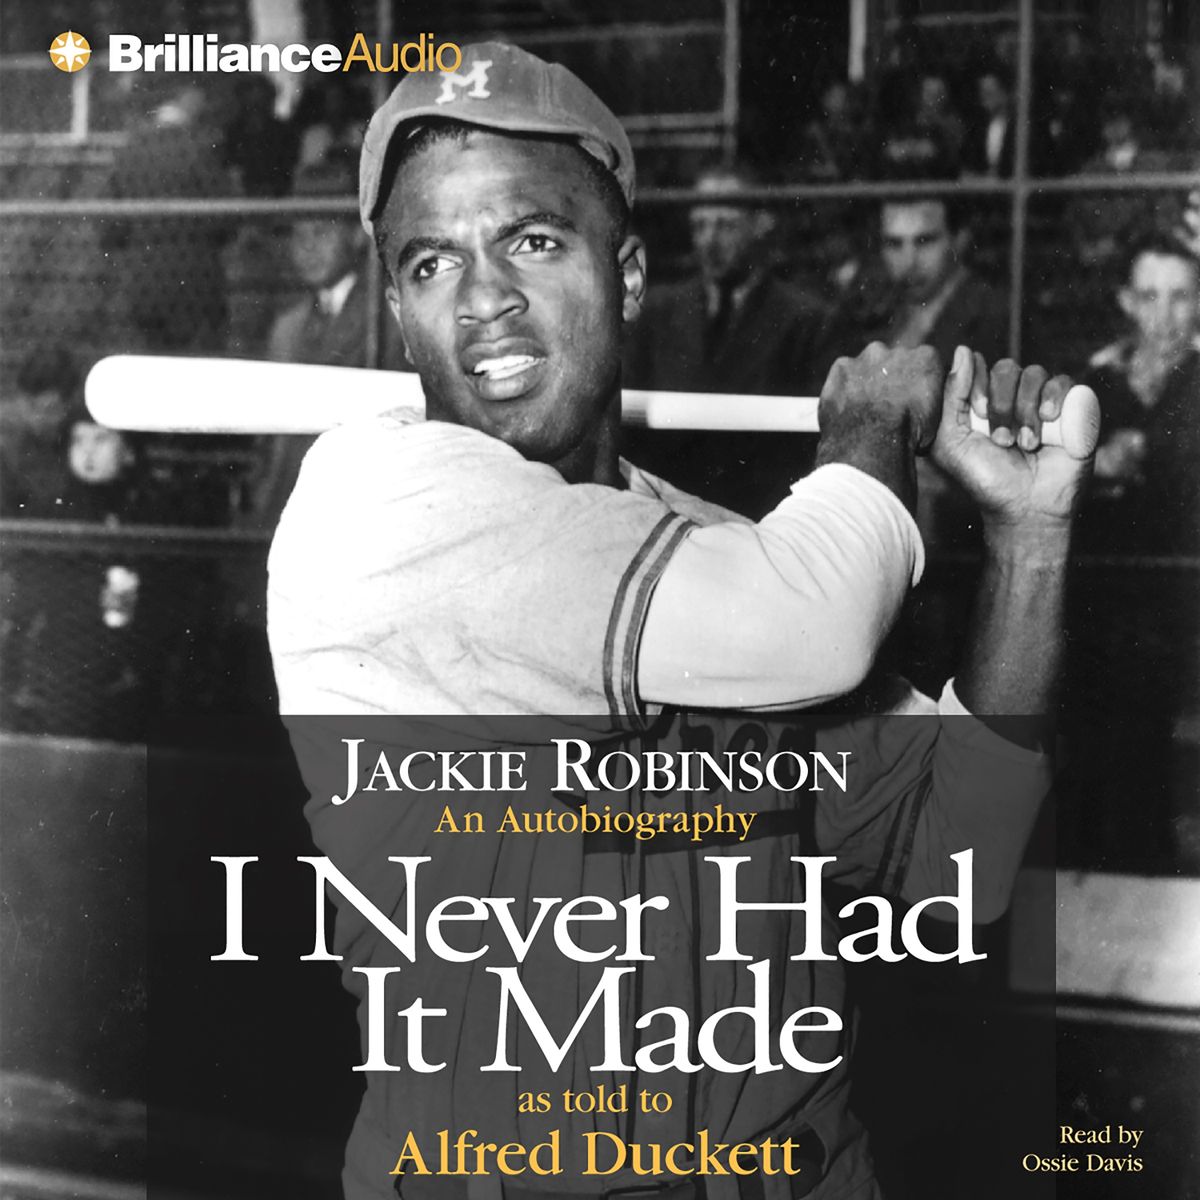 Rubama: Coaches wanted their team of 7-year-olds to learn about Jackie  Robinson. They got a lesson and wore No. 42 jerseys. – The Virginian-Pilot